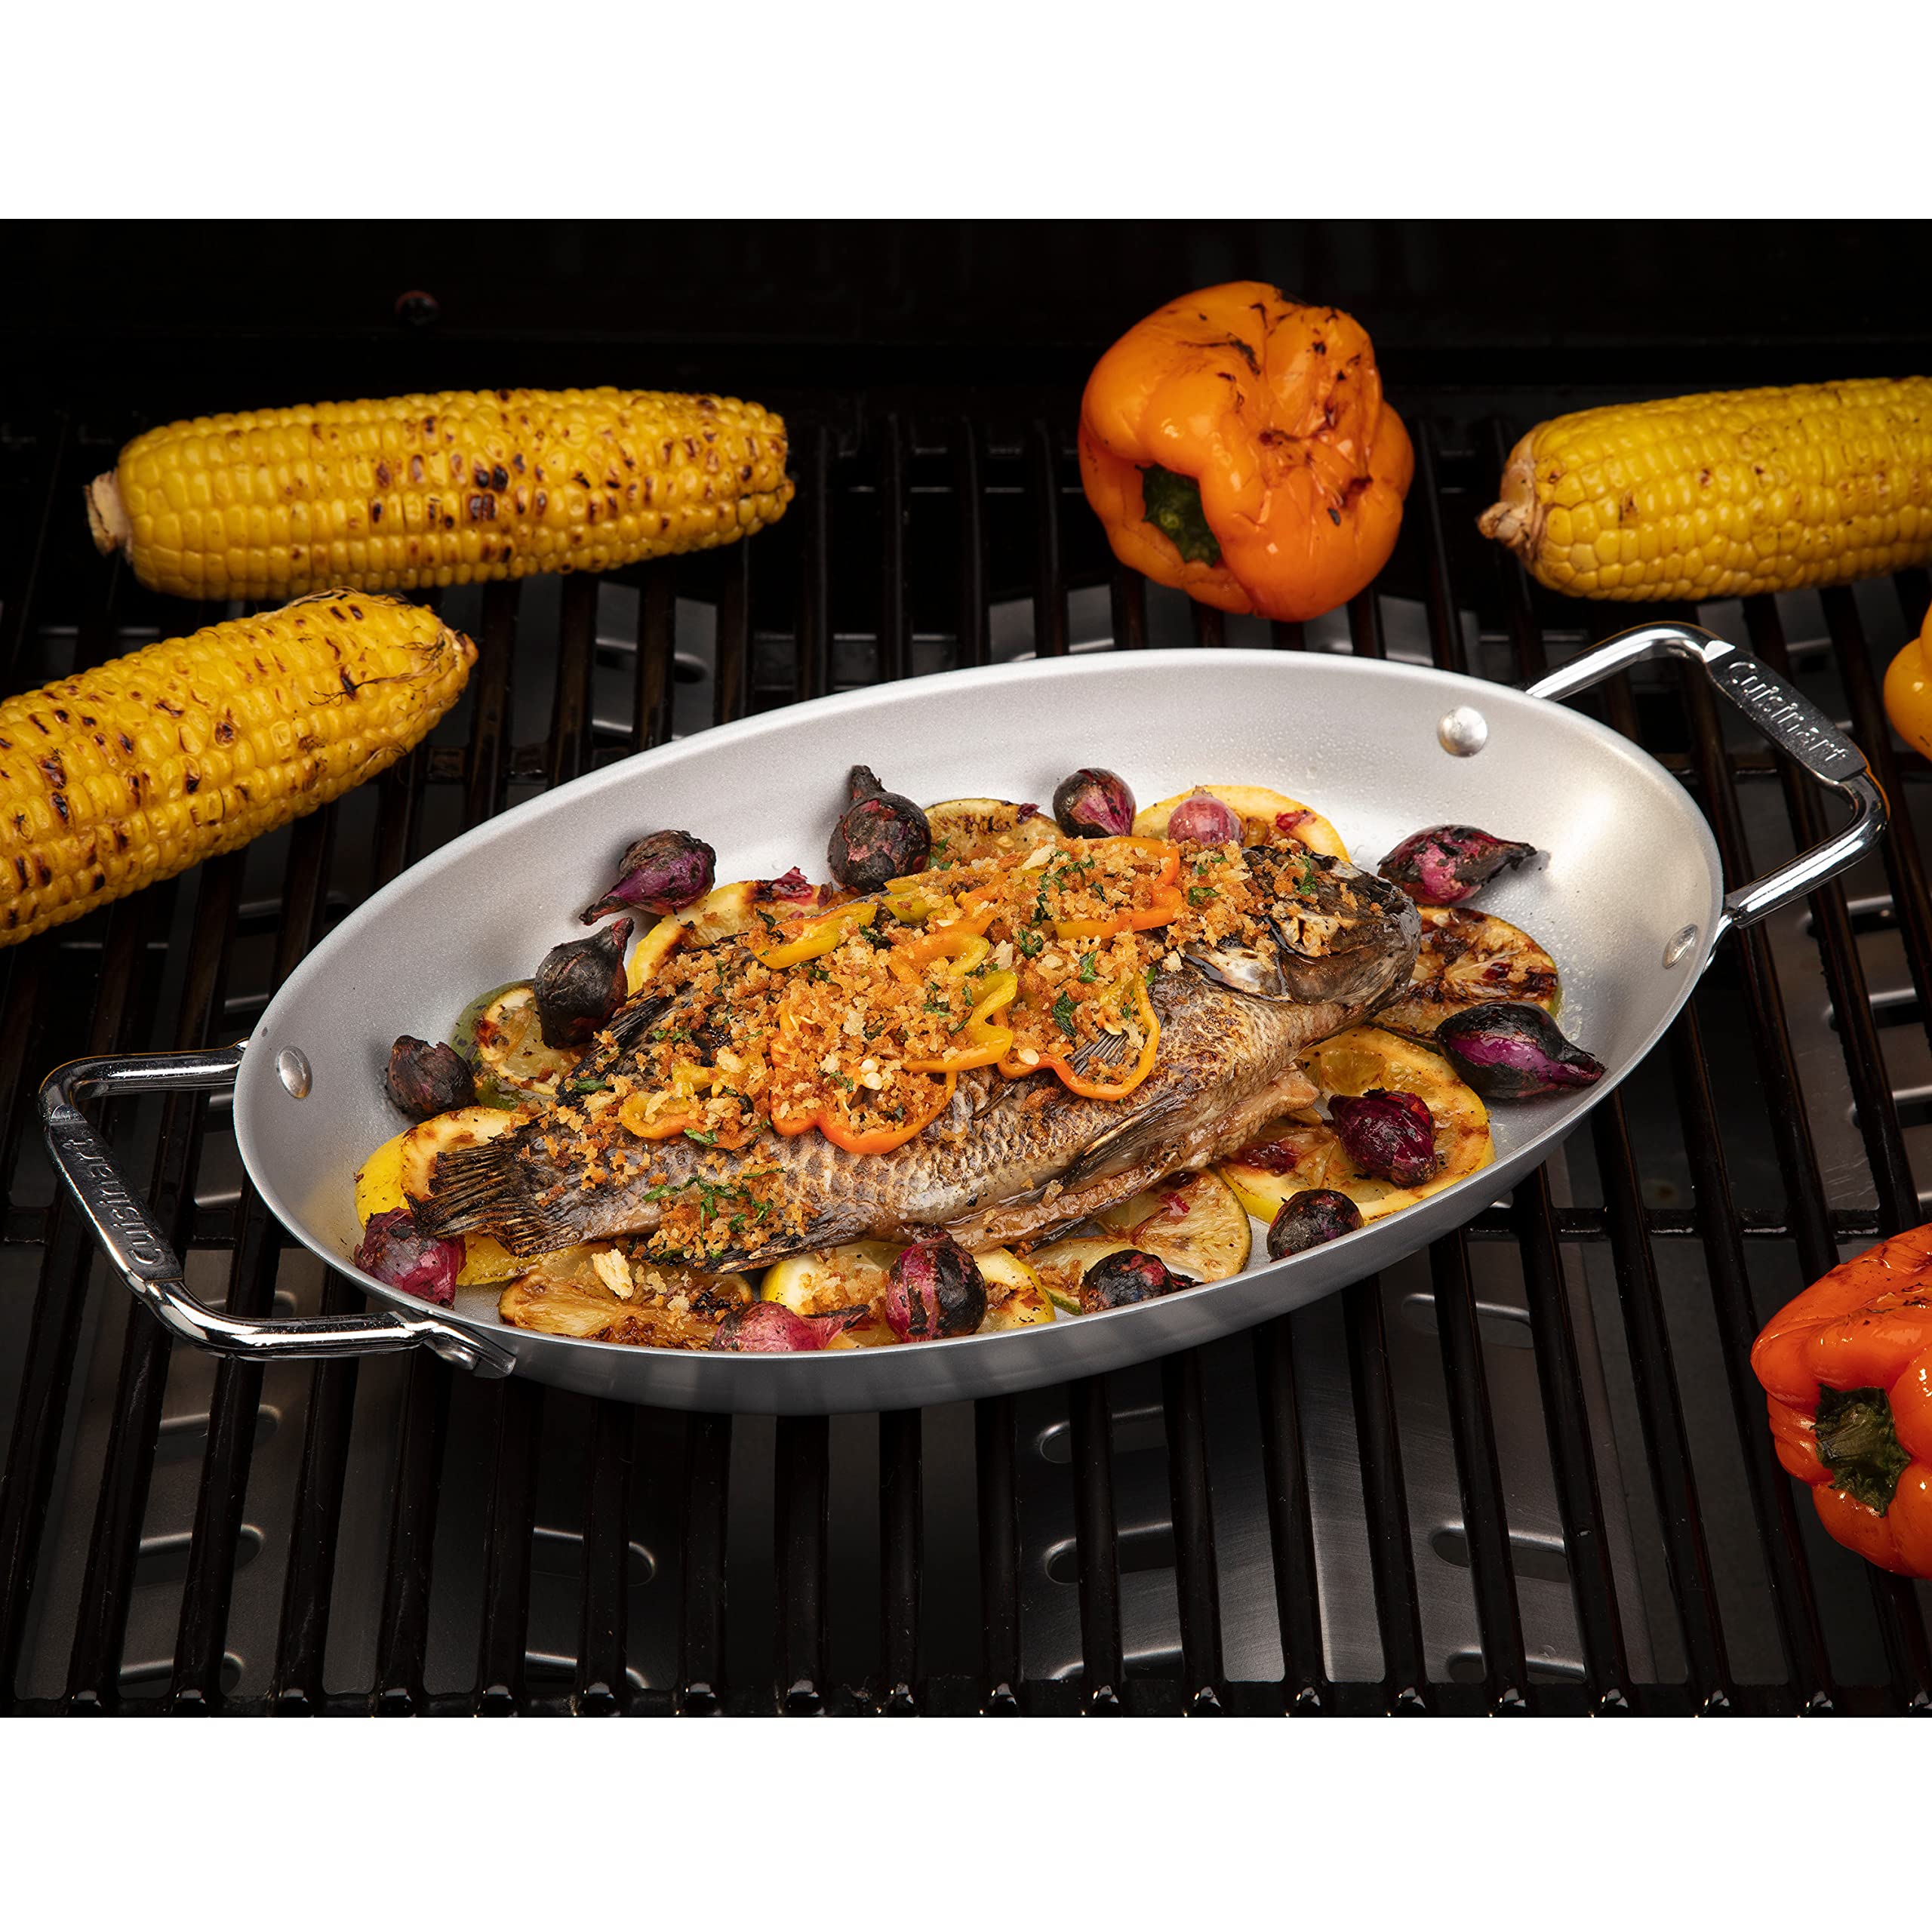 Cuisinart CNPO-700 Non-Stick, Oval Grilling Pan, 13